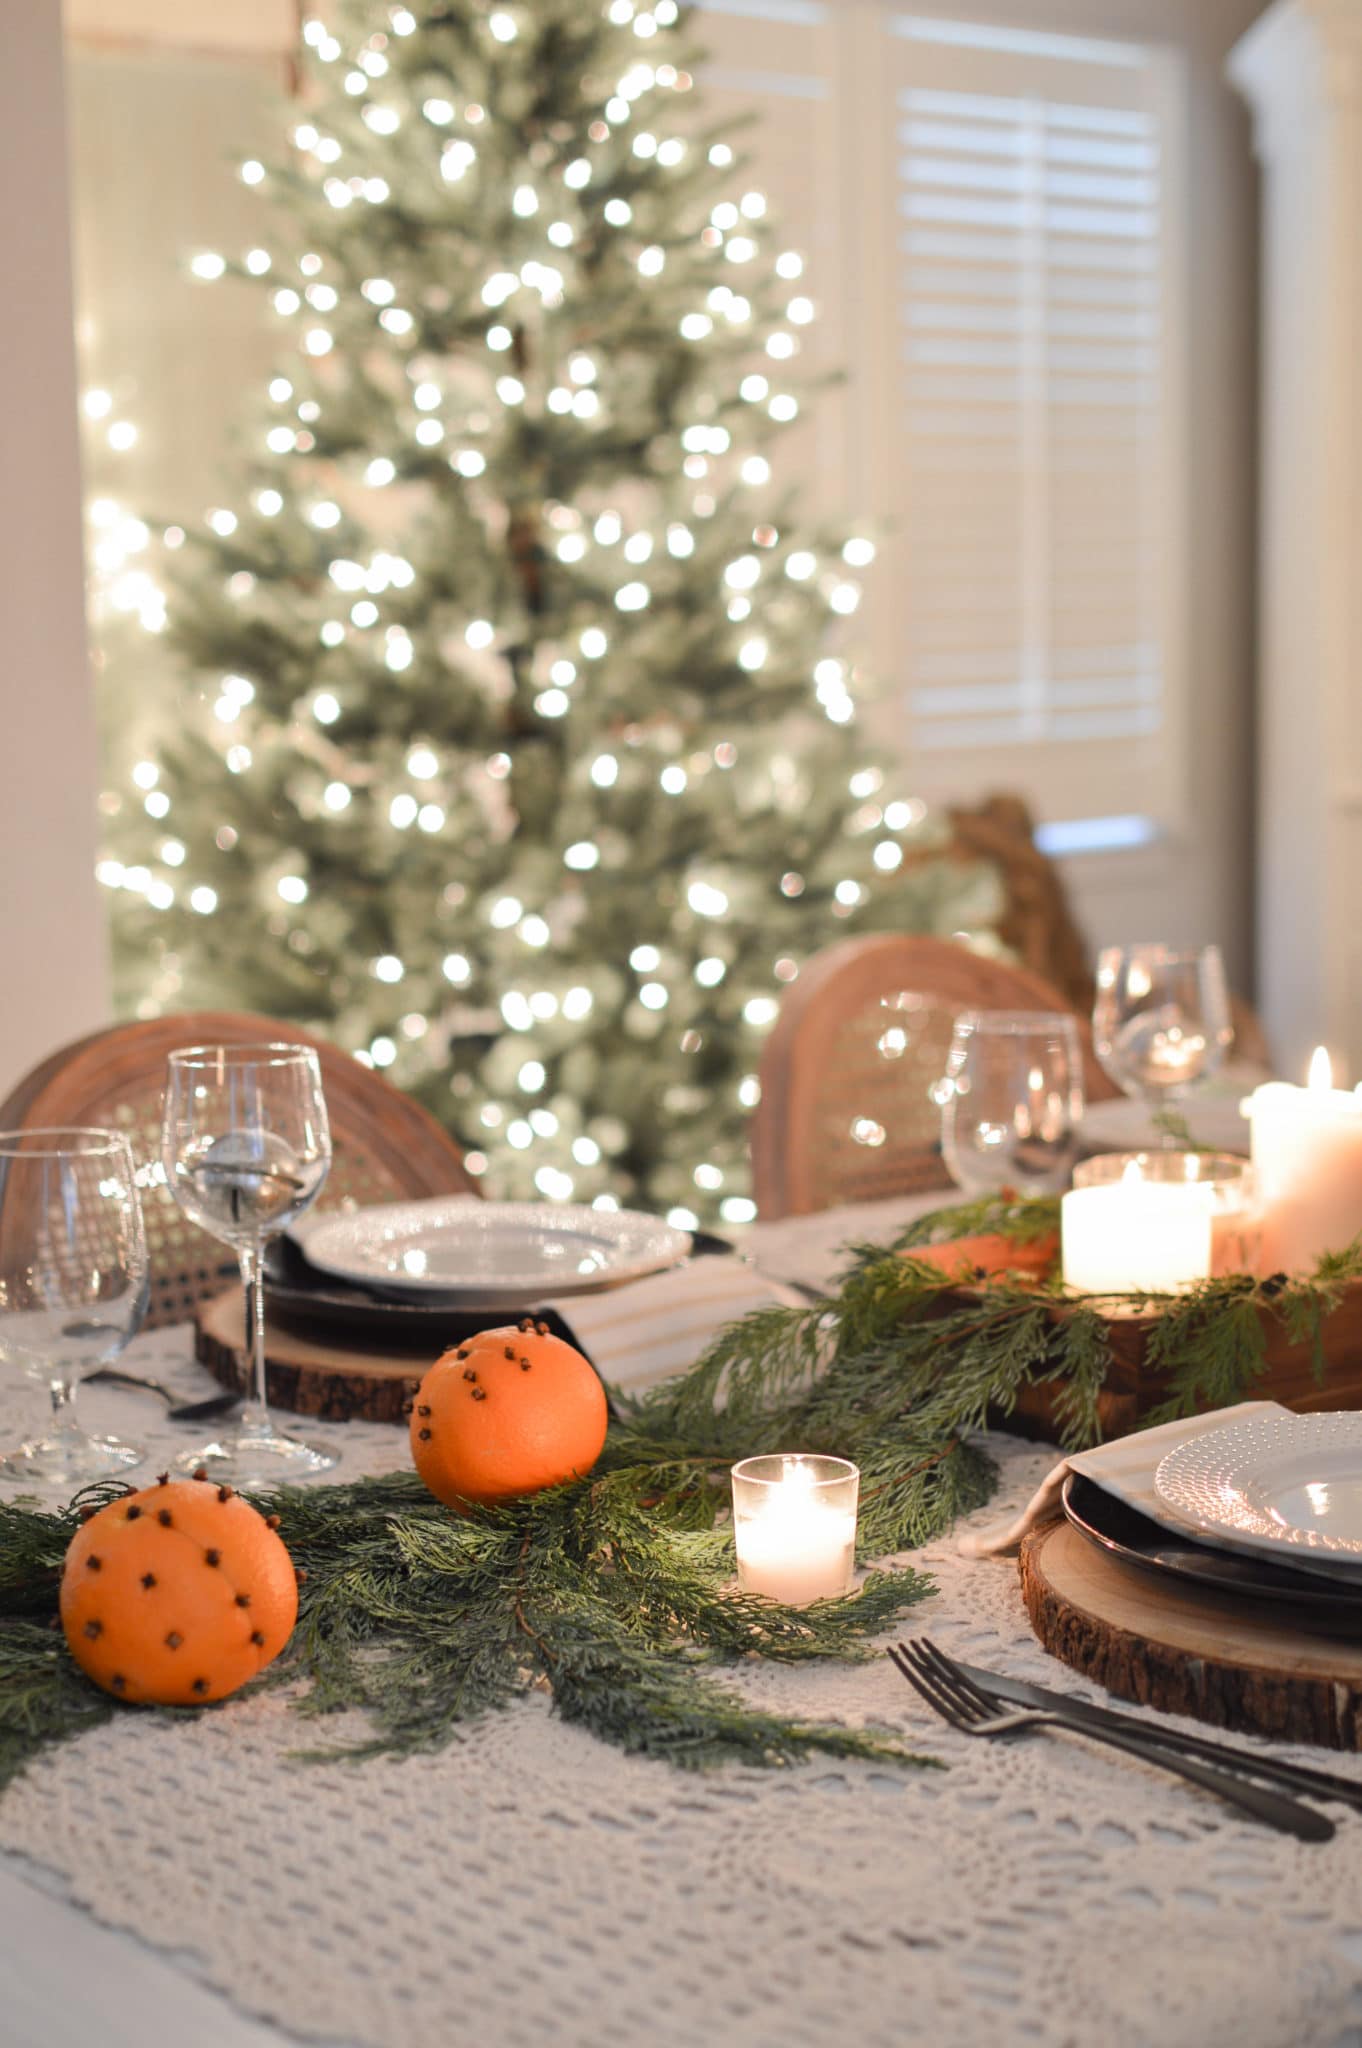 Holiday centerpiece idea featuring Oranges and Cloves